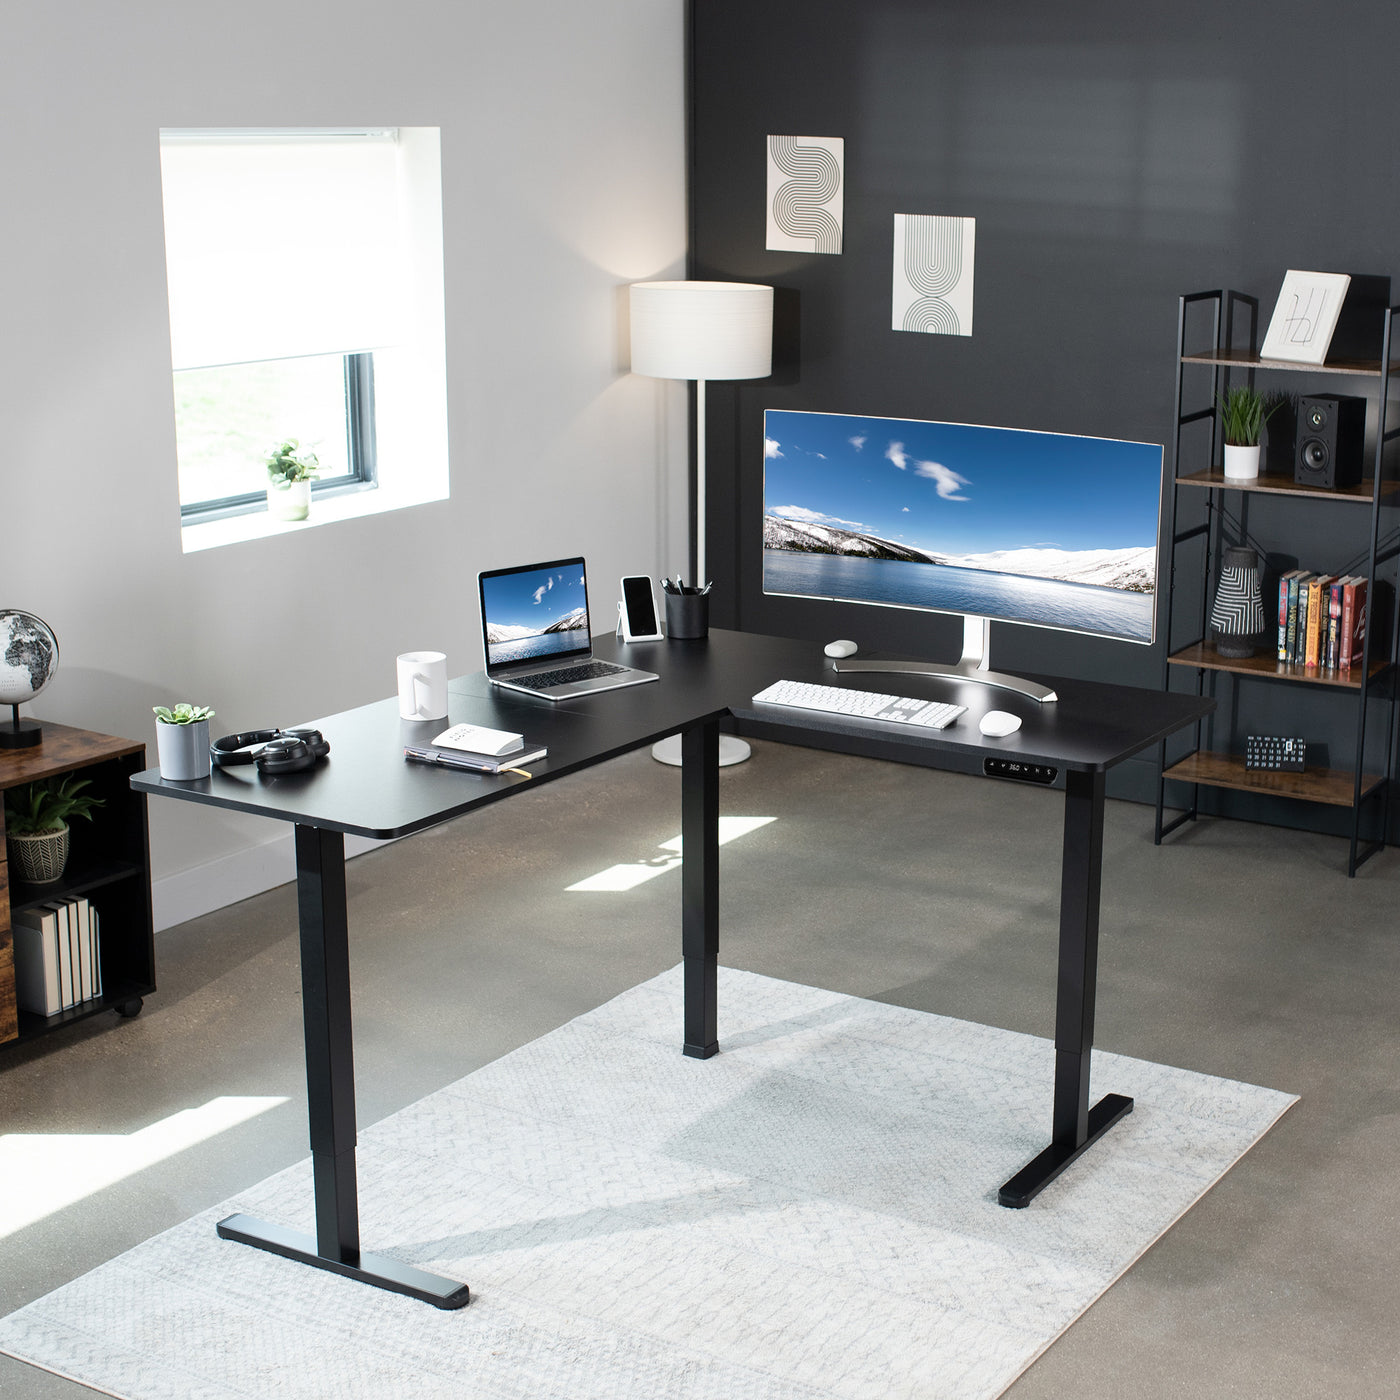 Little Office Corner - Work/Play Standing Desk Set Up + Cable